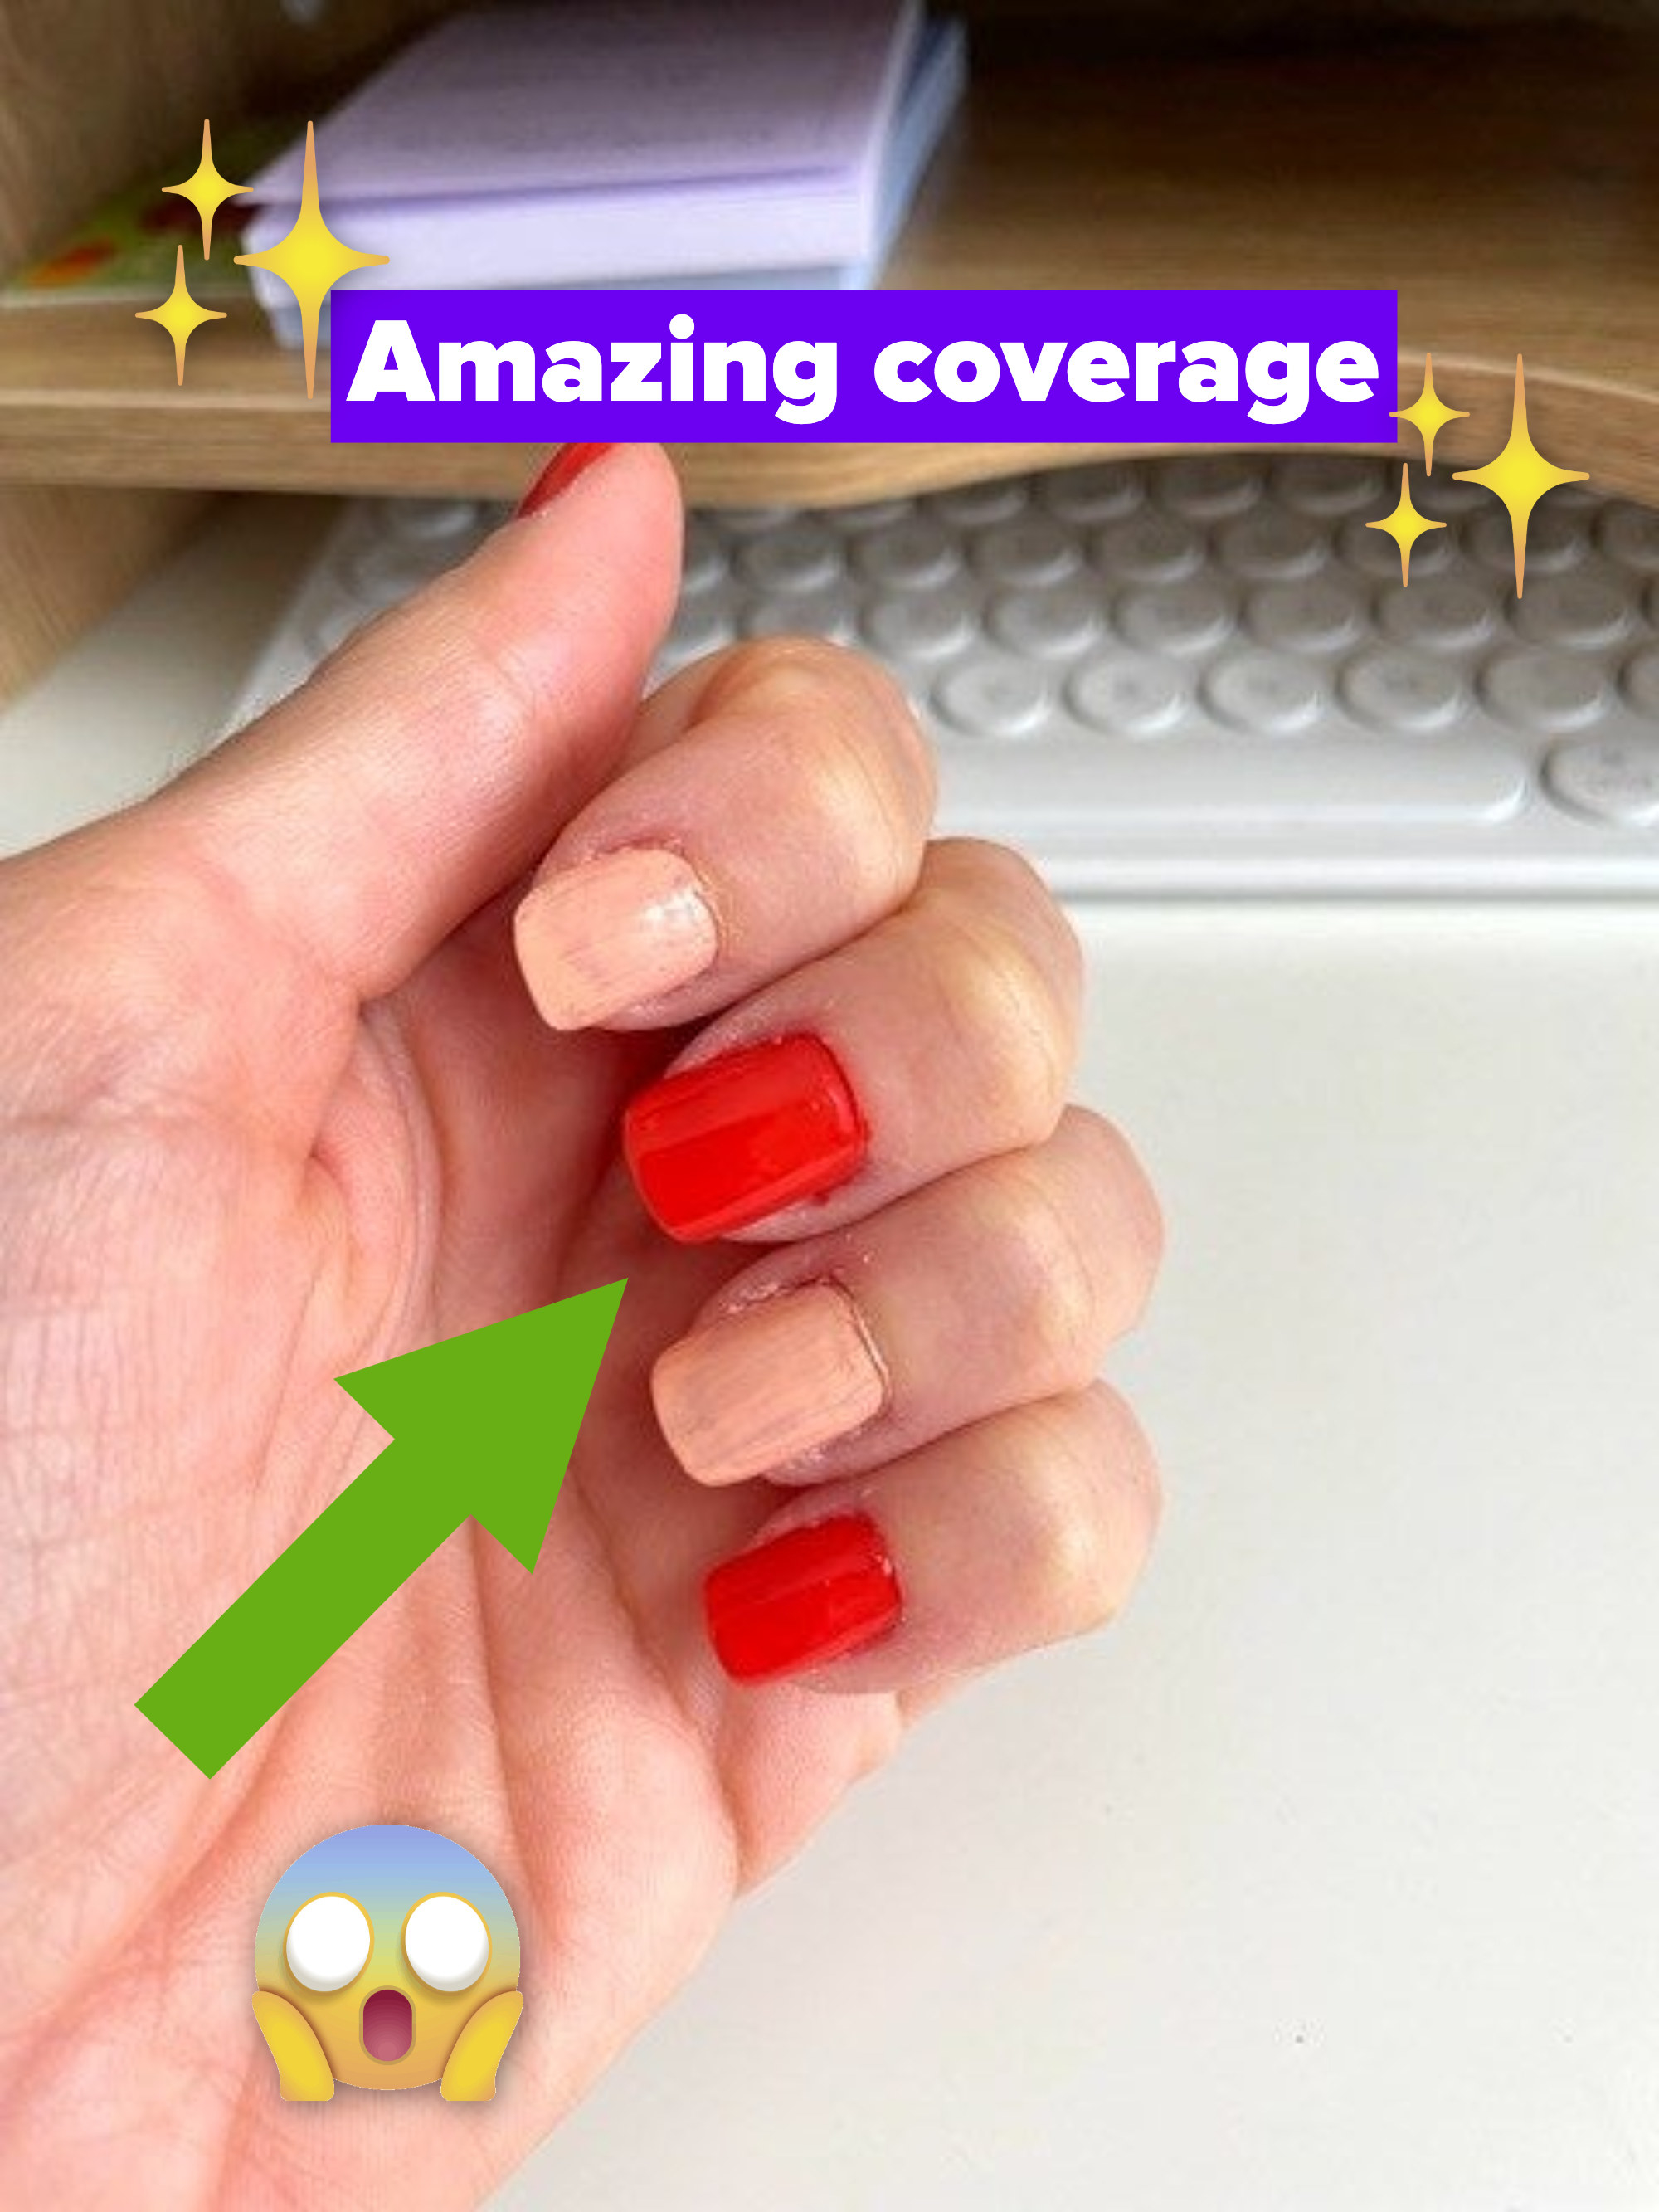 The Best Red Nail Polishes To Make Your Manicure Pop